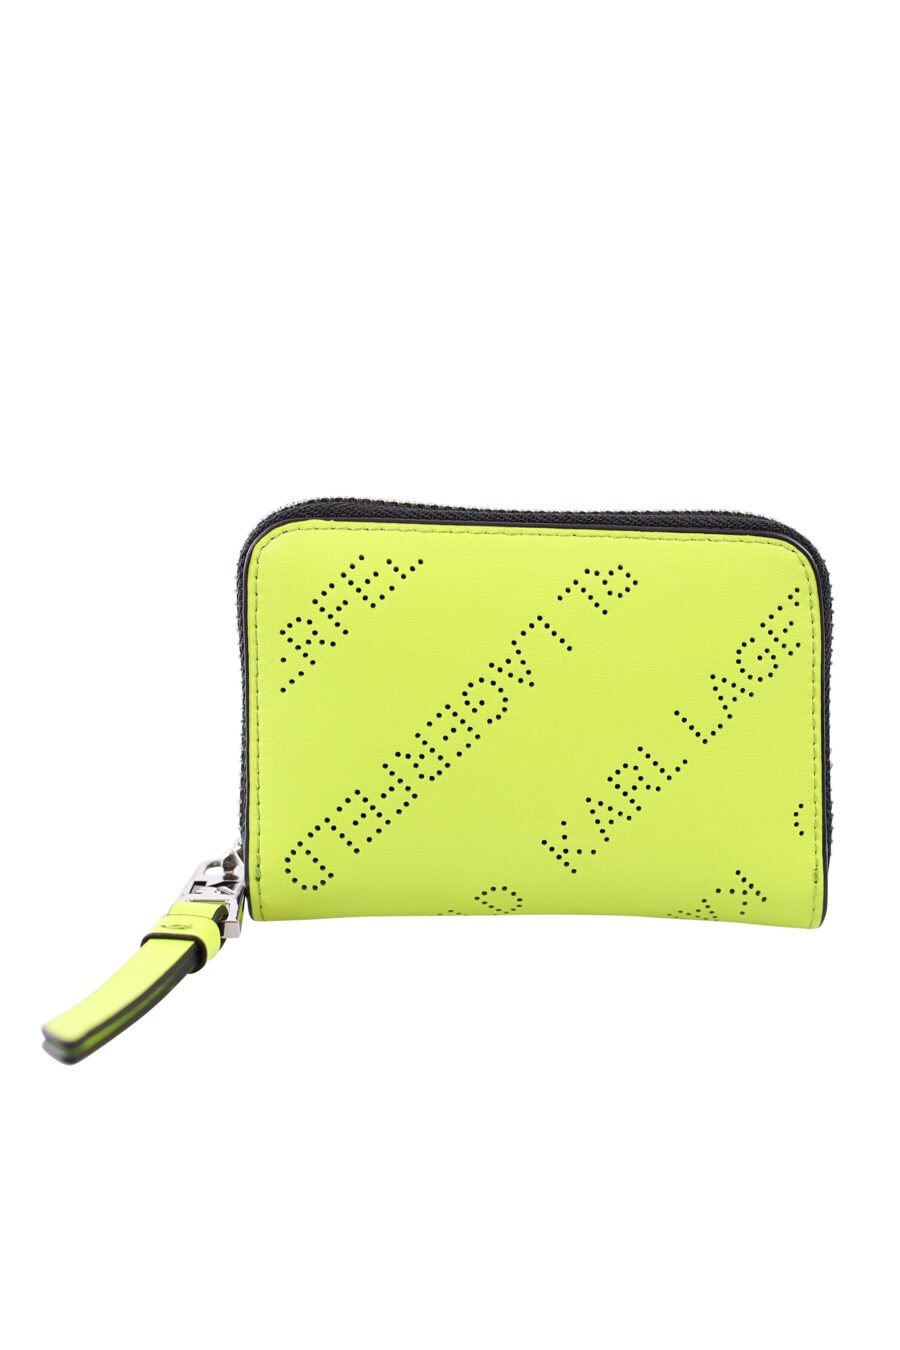 Lime green small wallet with perforated logo and zip - IMG 1818